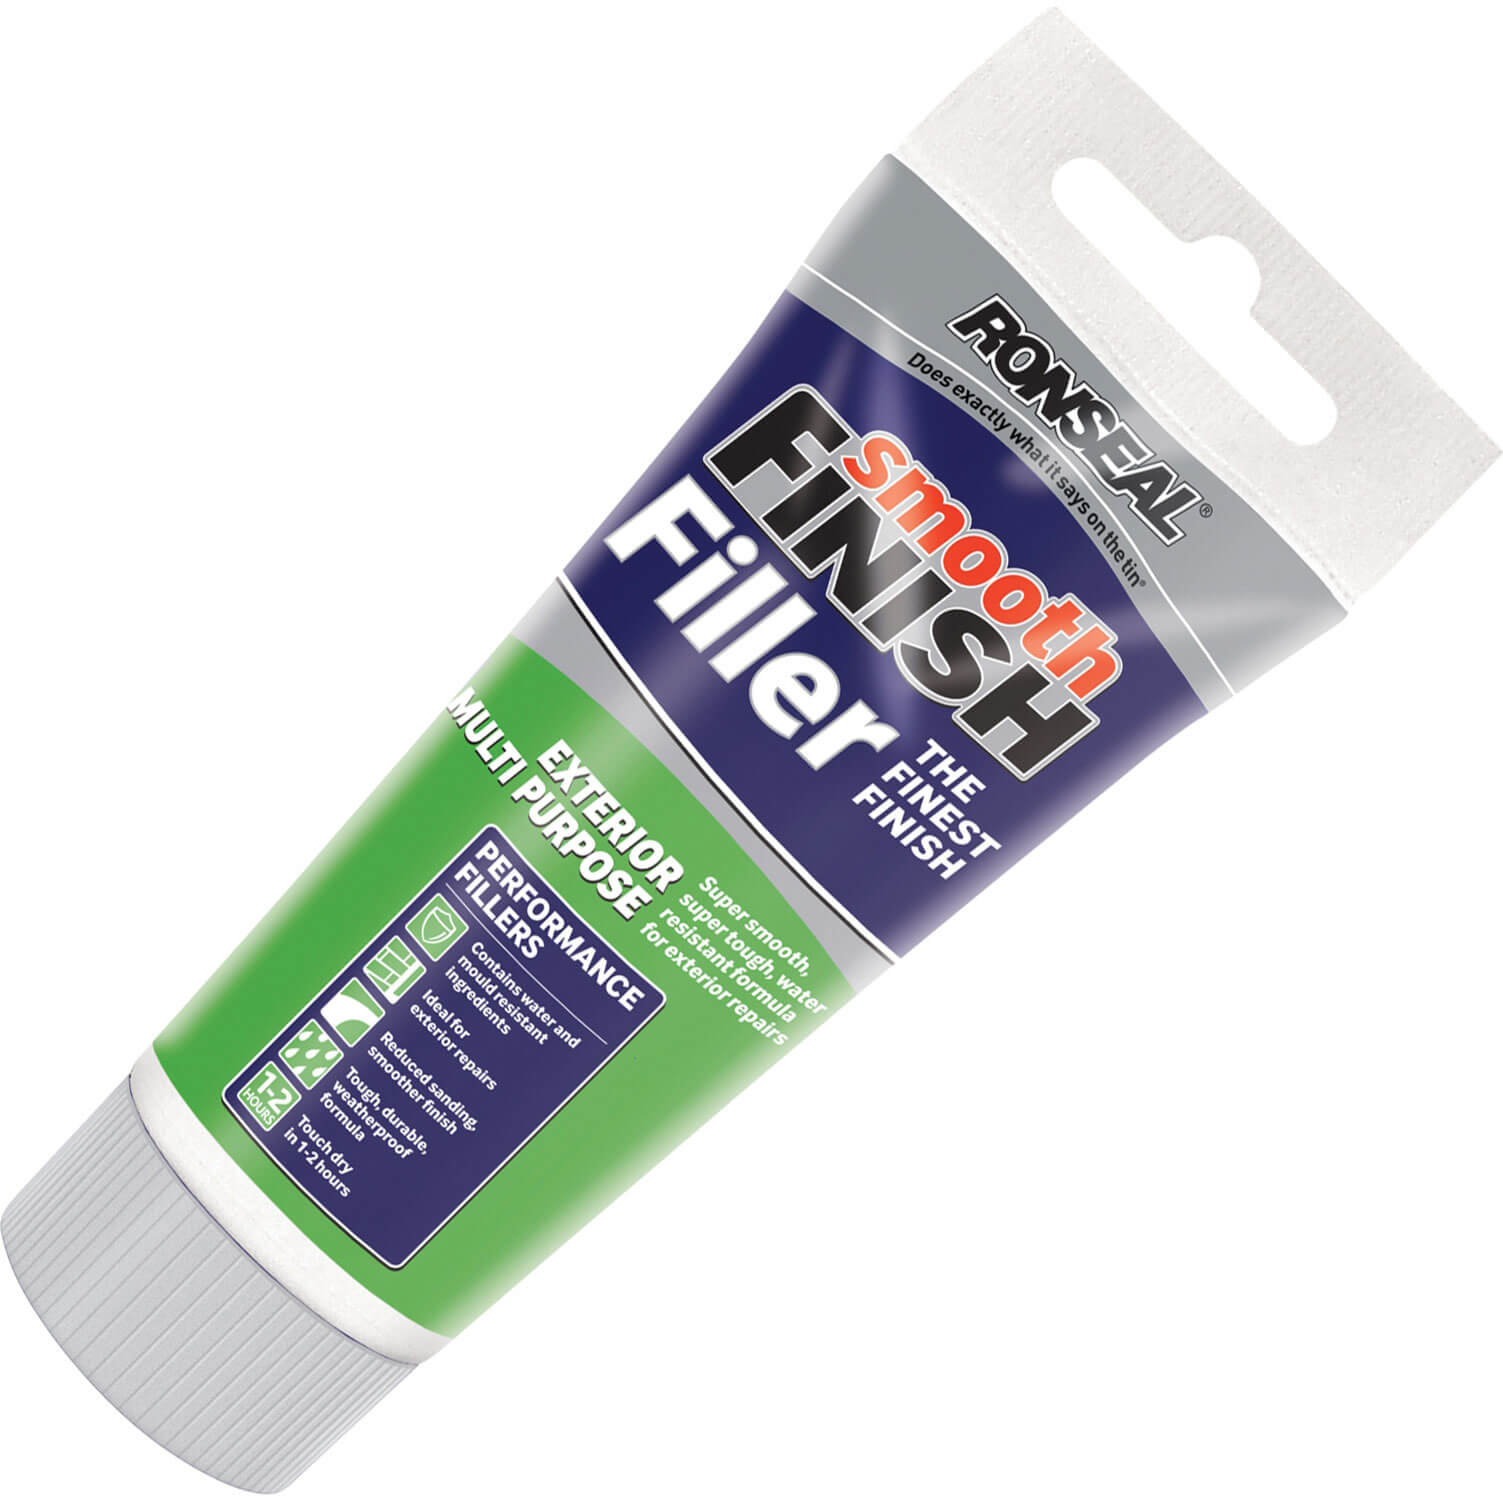 Image of Ronseal Smooth Finish Exterior Multi Purpose Ready Mix Fille 33g